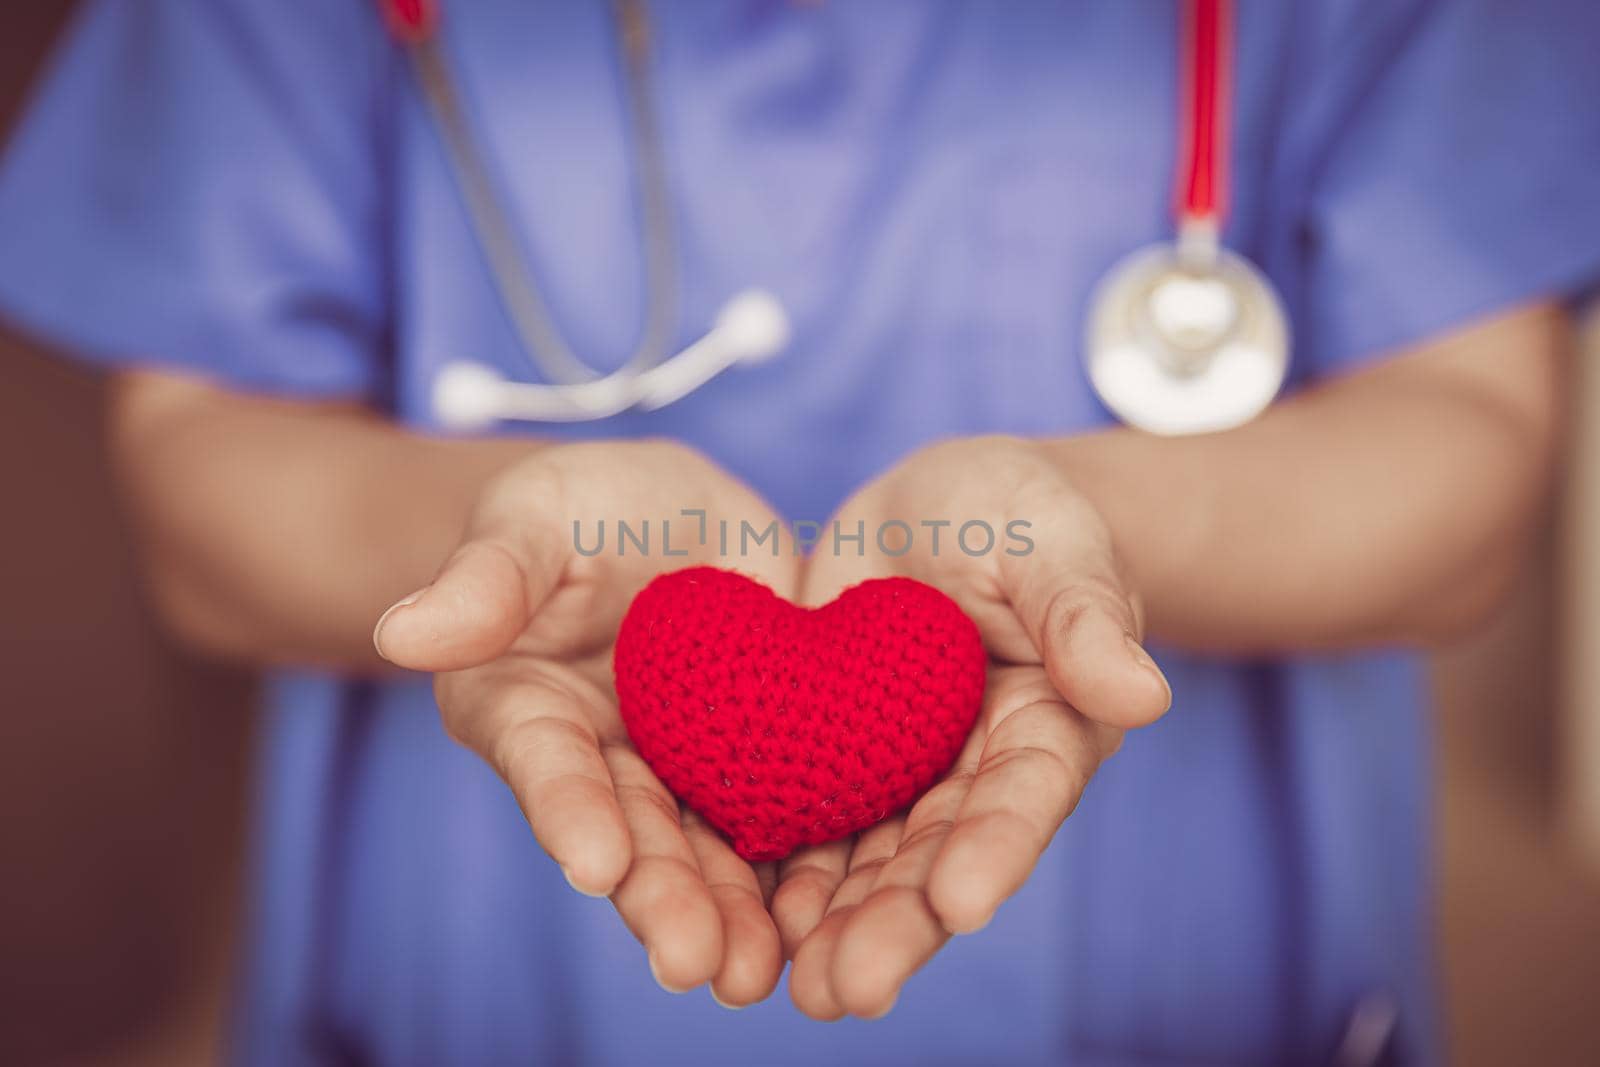 Doctor Nurse hand giving red heart for help care or blood donation healthcare share love to fight disease concept.